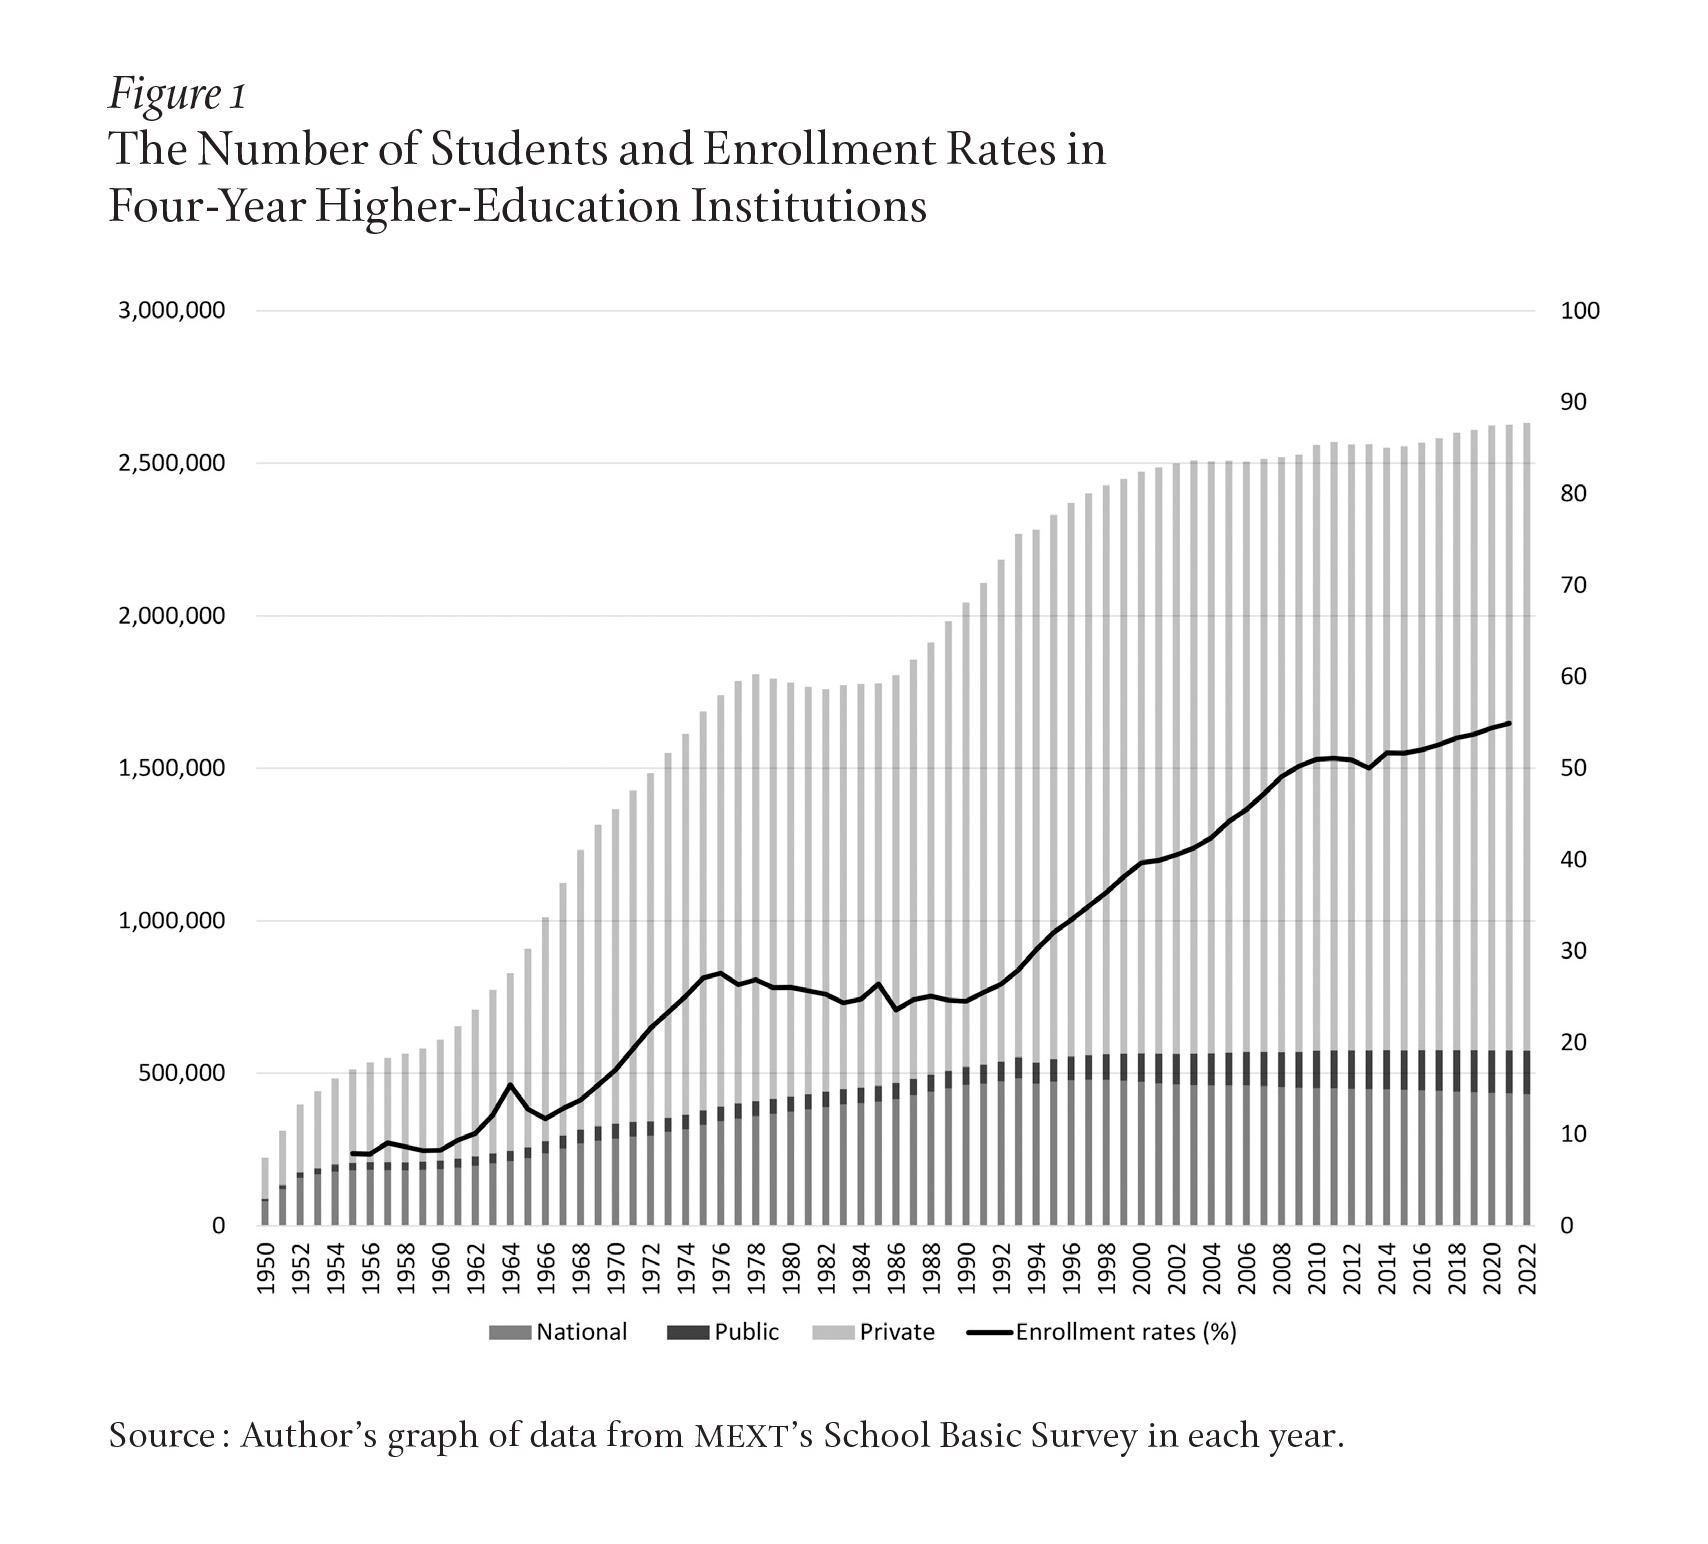 An area graph shows enrollment rates at four-year institutions rose from around 10% to 55% between 1955 and 2020, with a steady increase beginning in 1990. Students at national and public institutions remained constant (approximately 500,000 students enrolled), while students at private institutions increased from less than 500,000 to a little over 2.5 million during the same period.